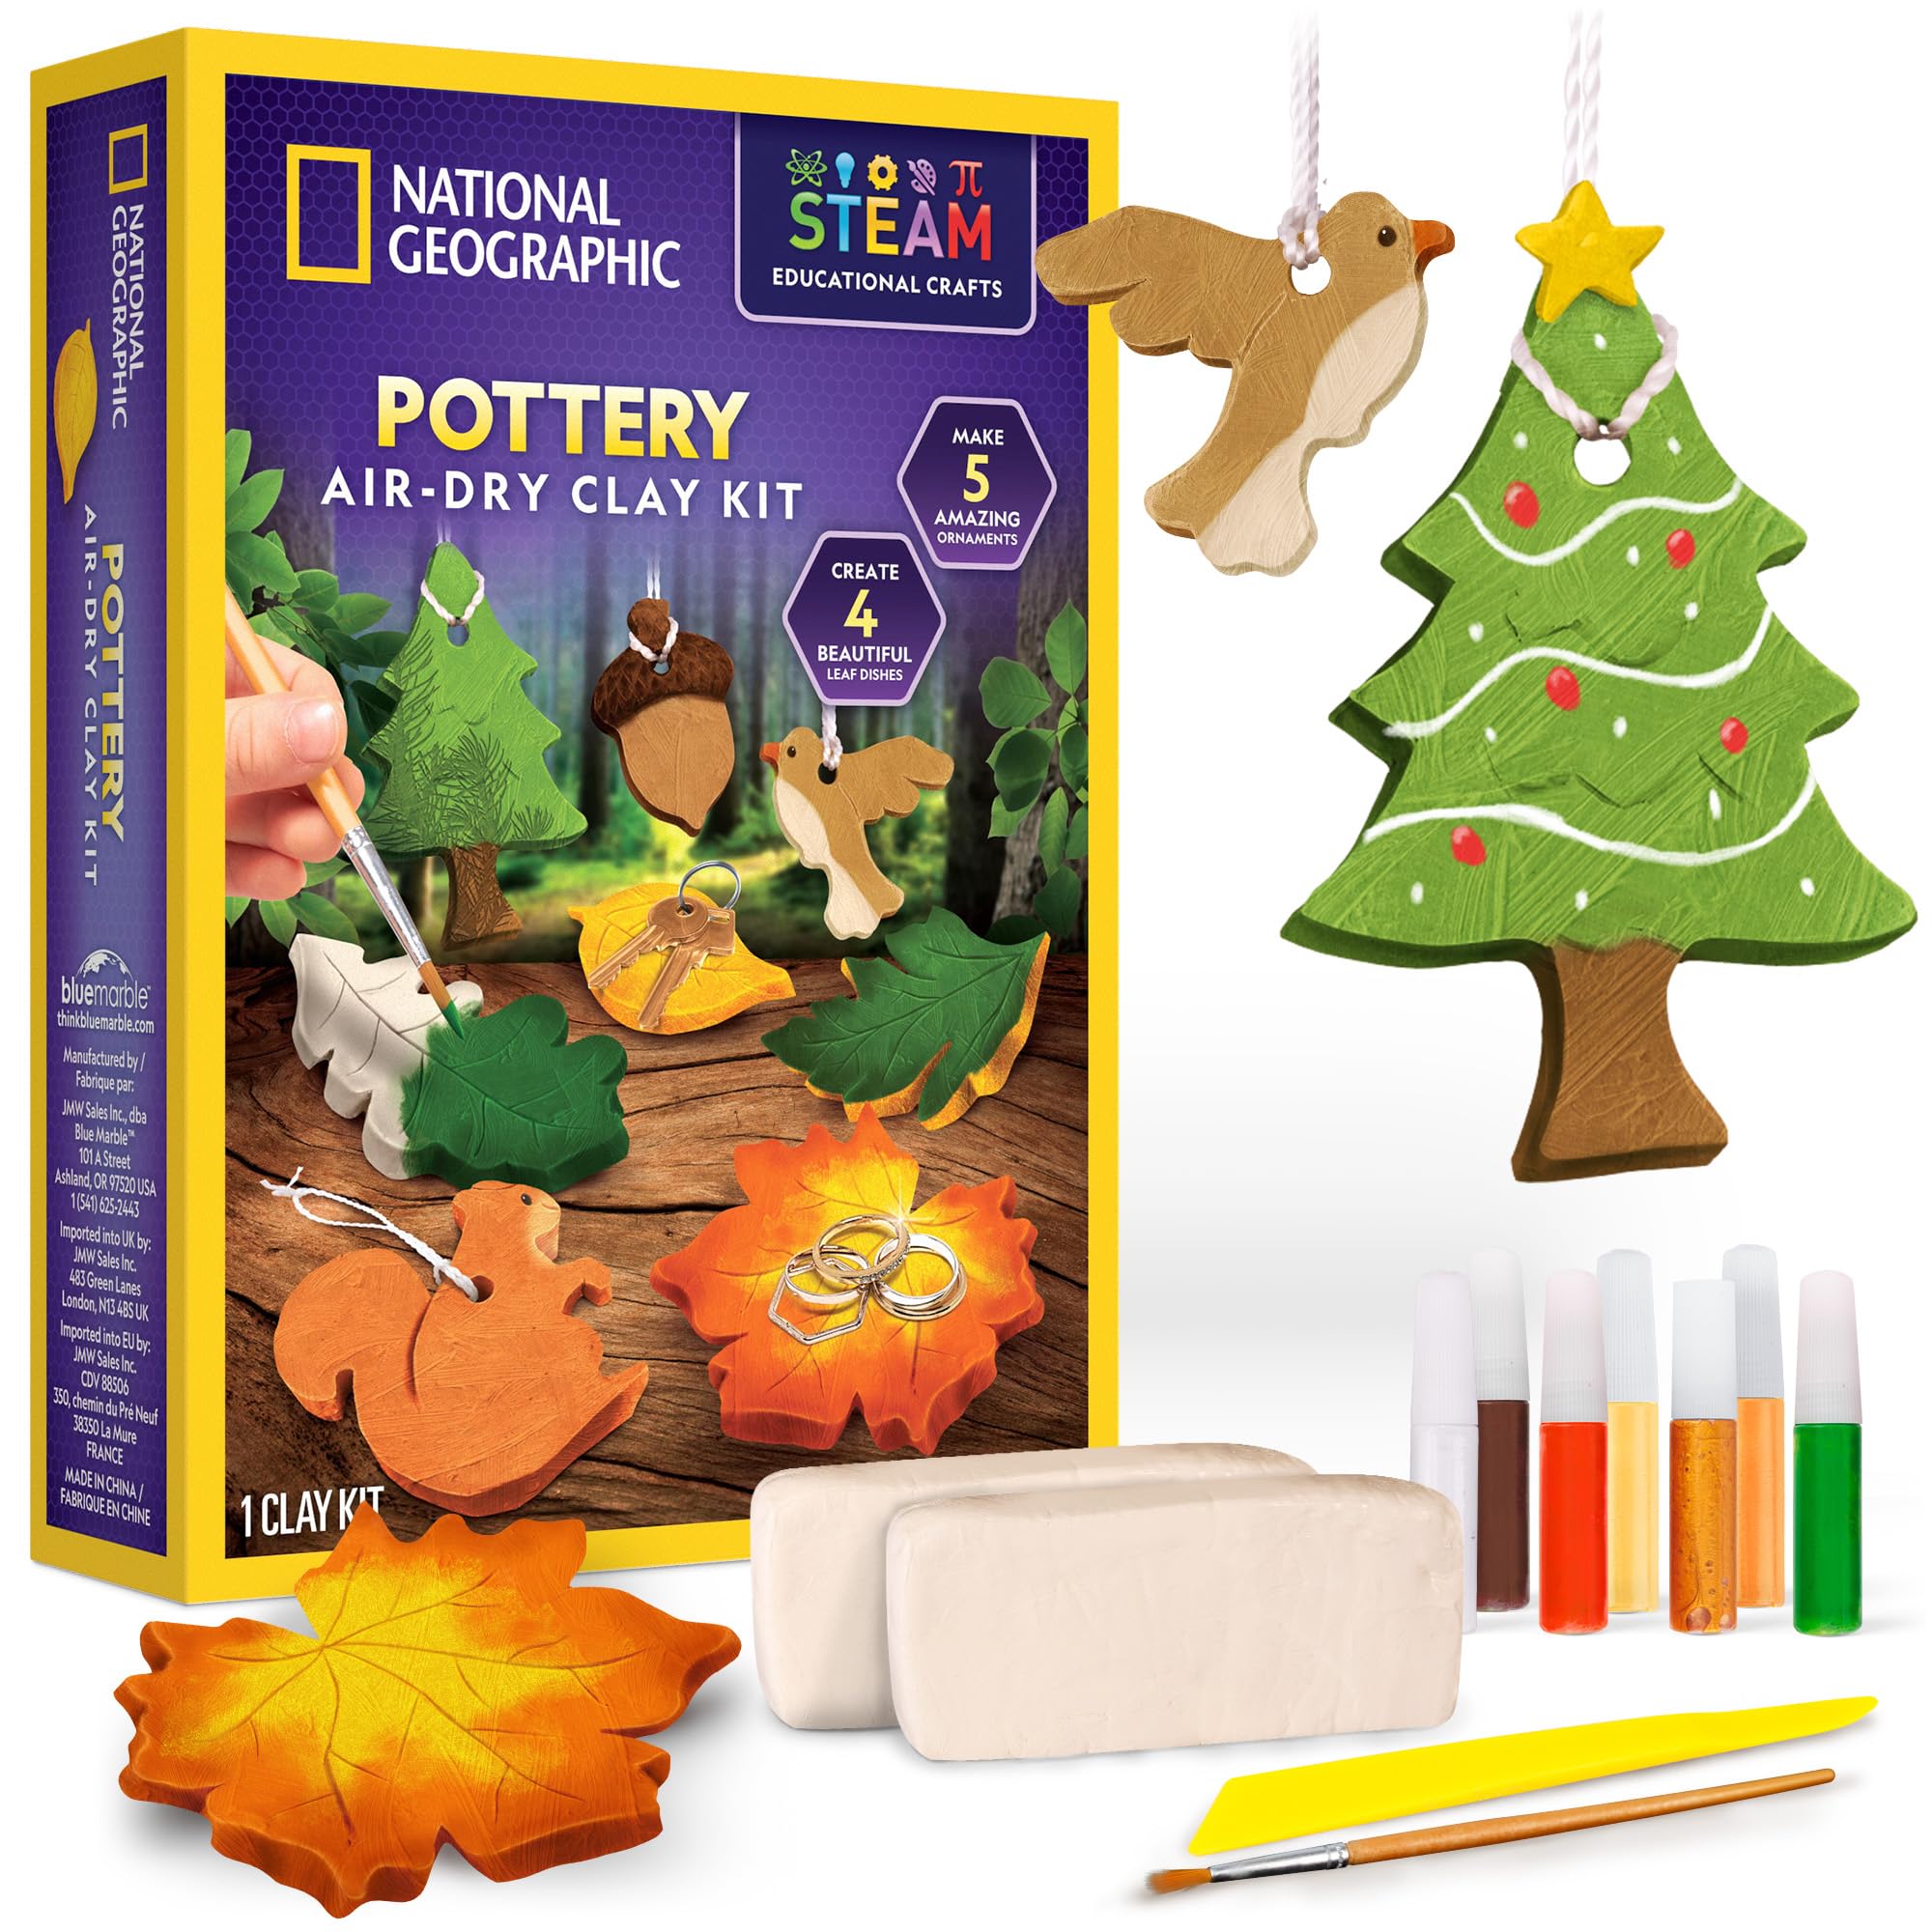 National Geographic Modeling Clay Arts & Crafts Kit - Air Dry Clay for Kids Craft Kit with 2 lb. Clay to Make 9 Art Projects, Kids 8-12, (Amazon Exclusive) $6.99